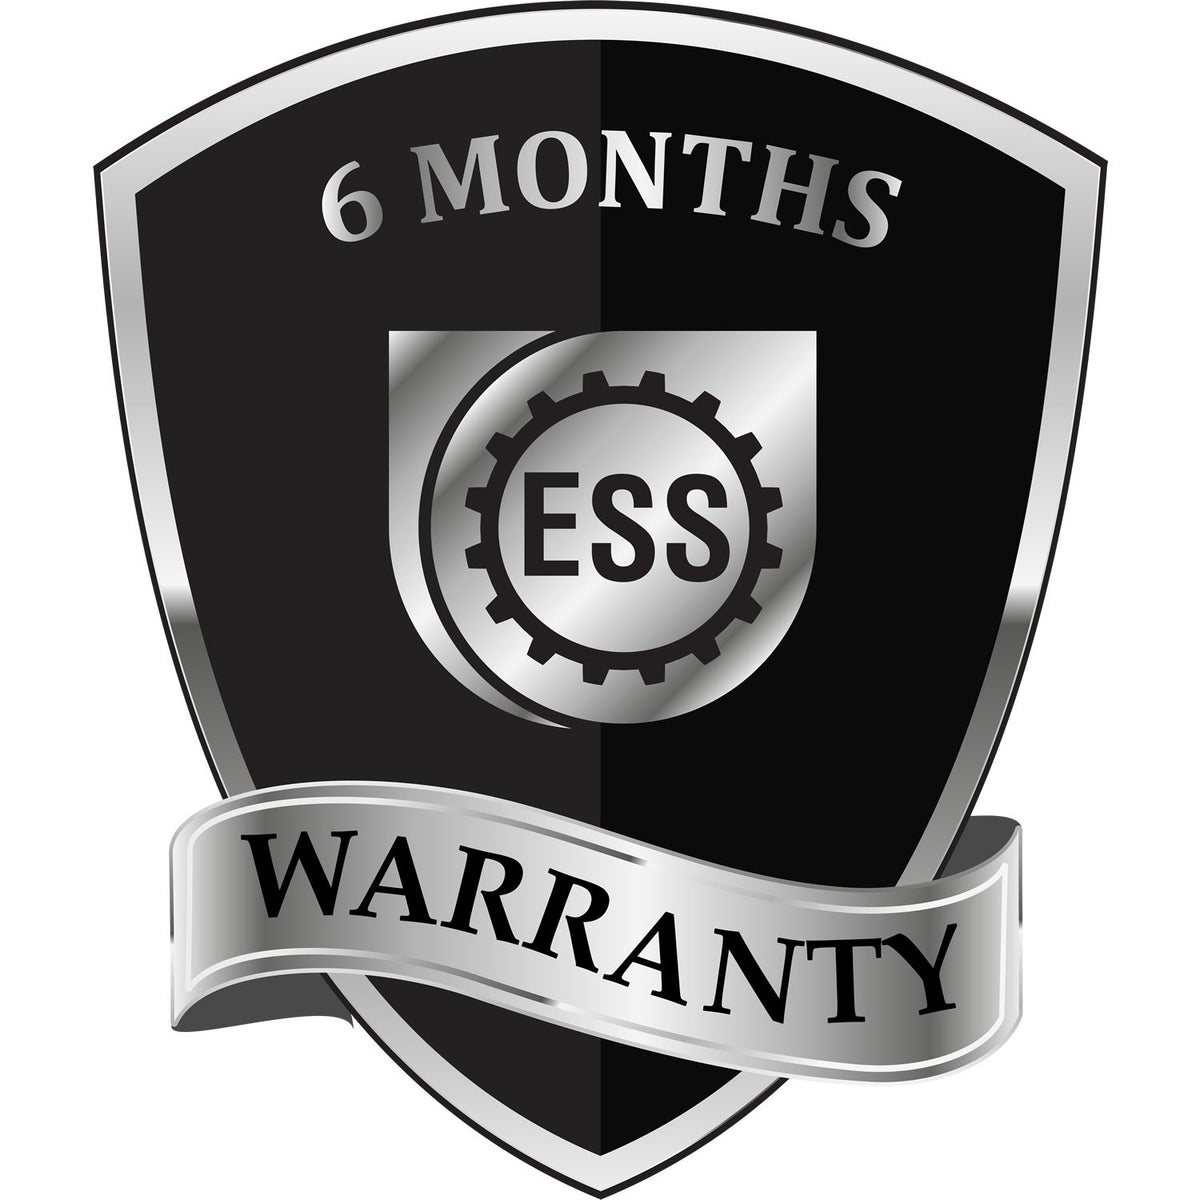 A badge or emblem showing a warranty icon for the Kentucky Professional Engineer Seal Stamp